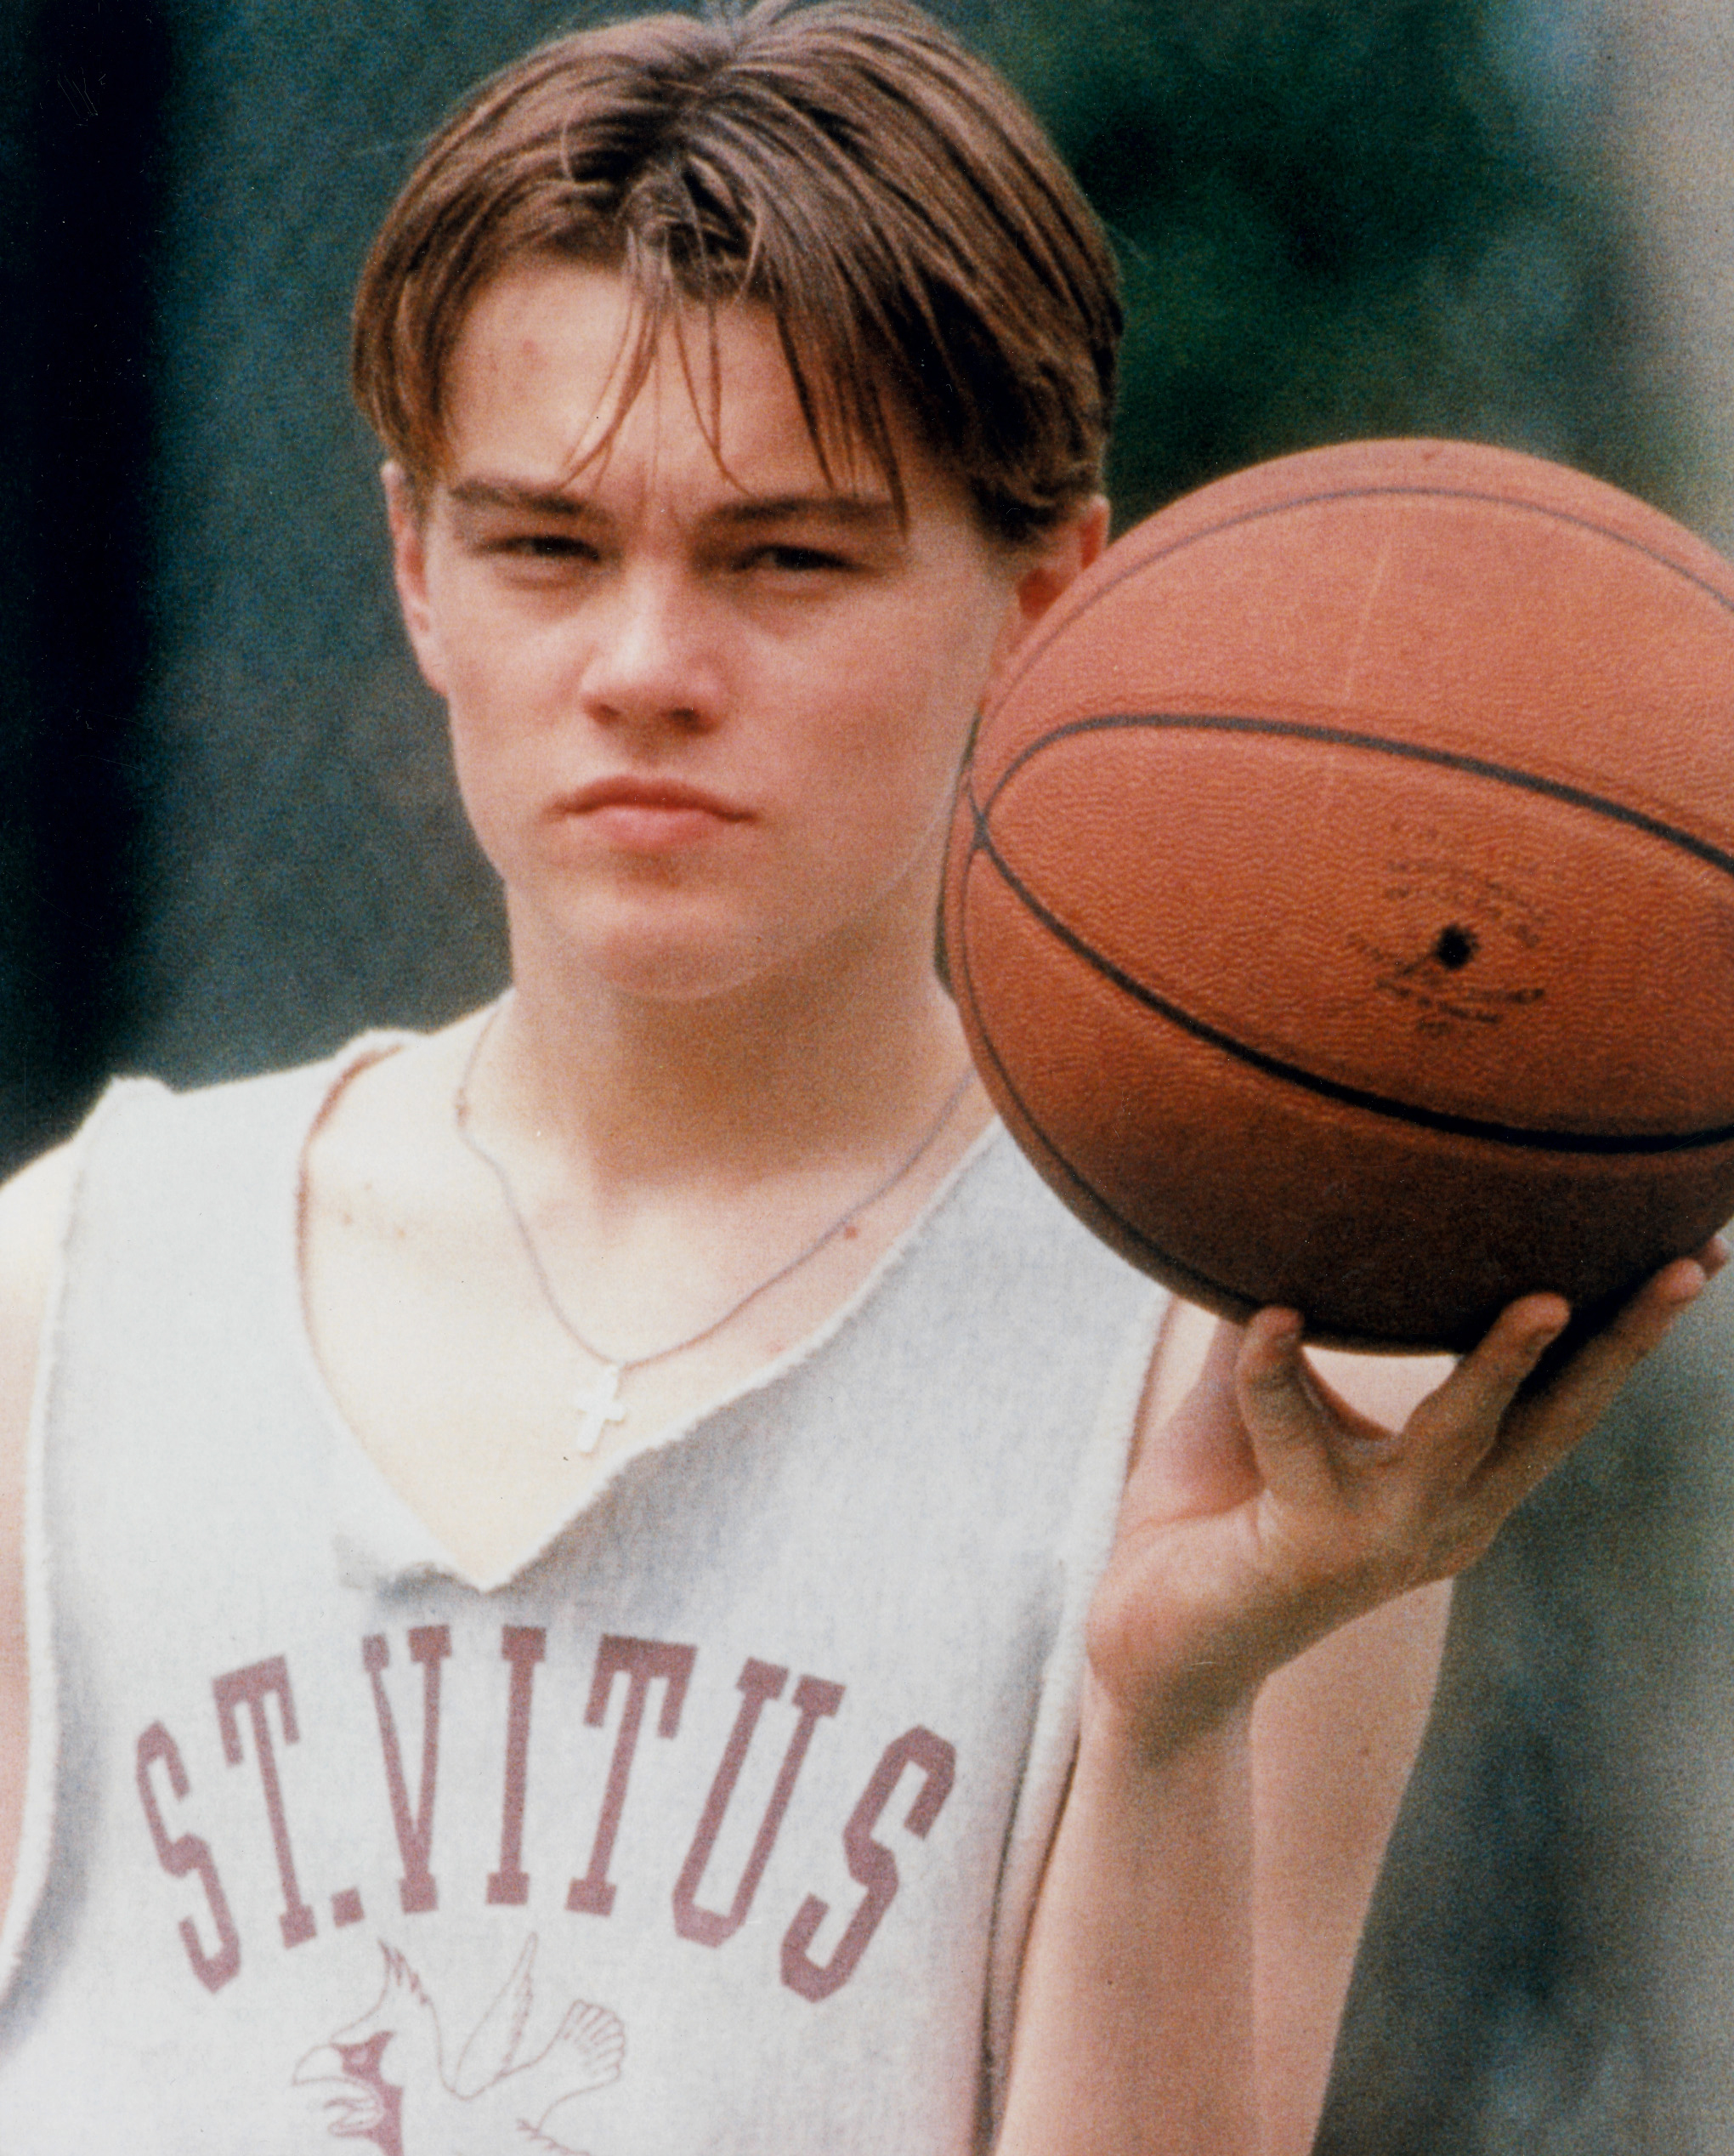 The Basketball Diaries, 1995